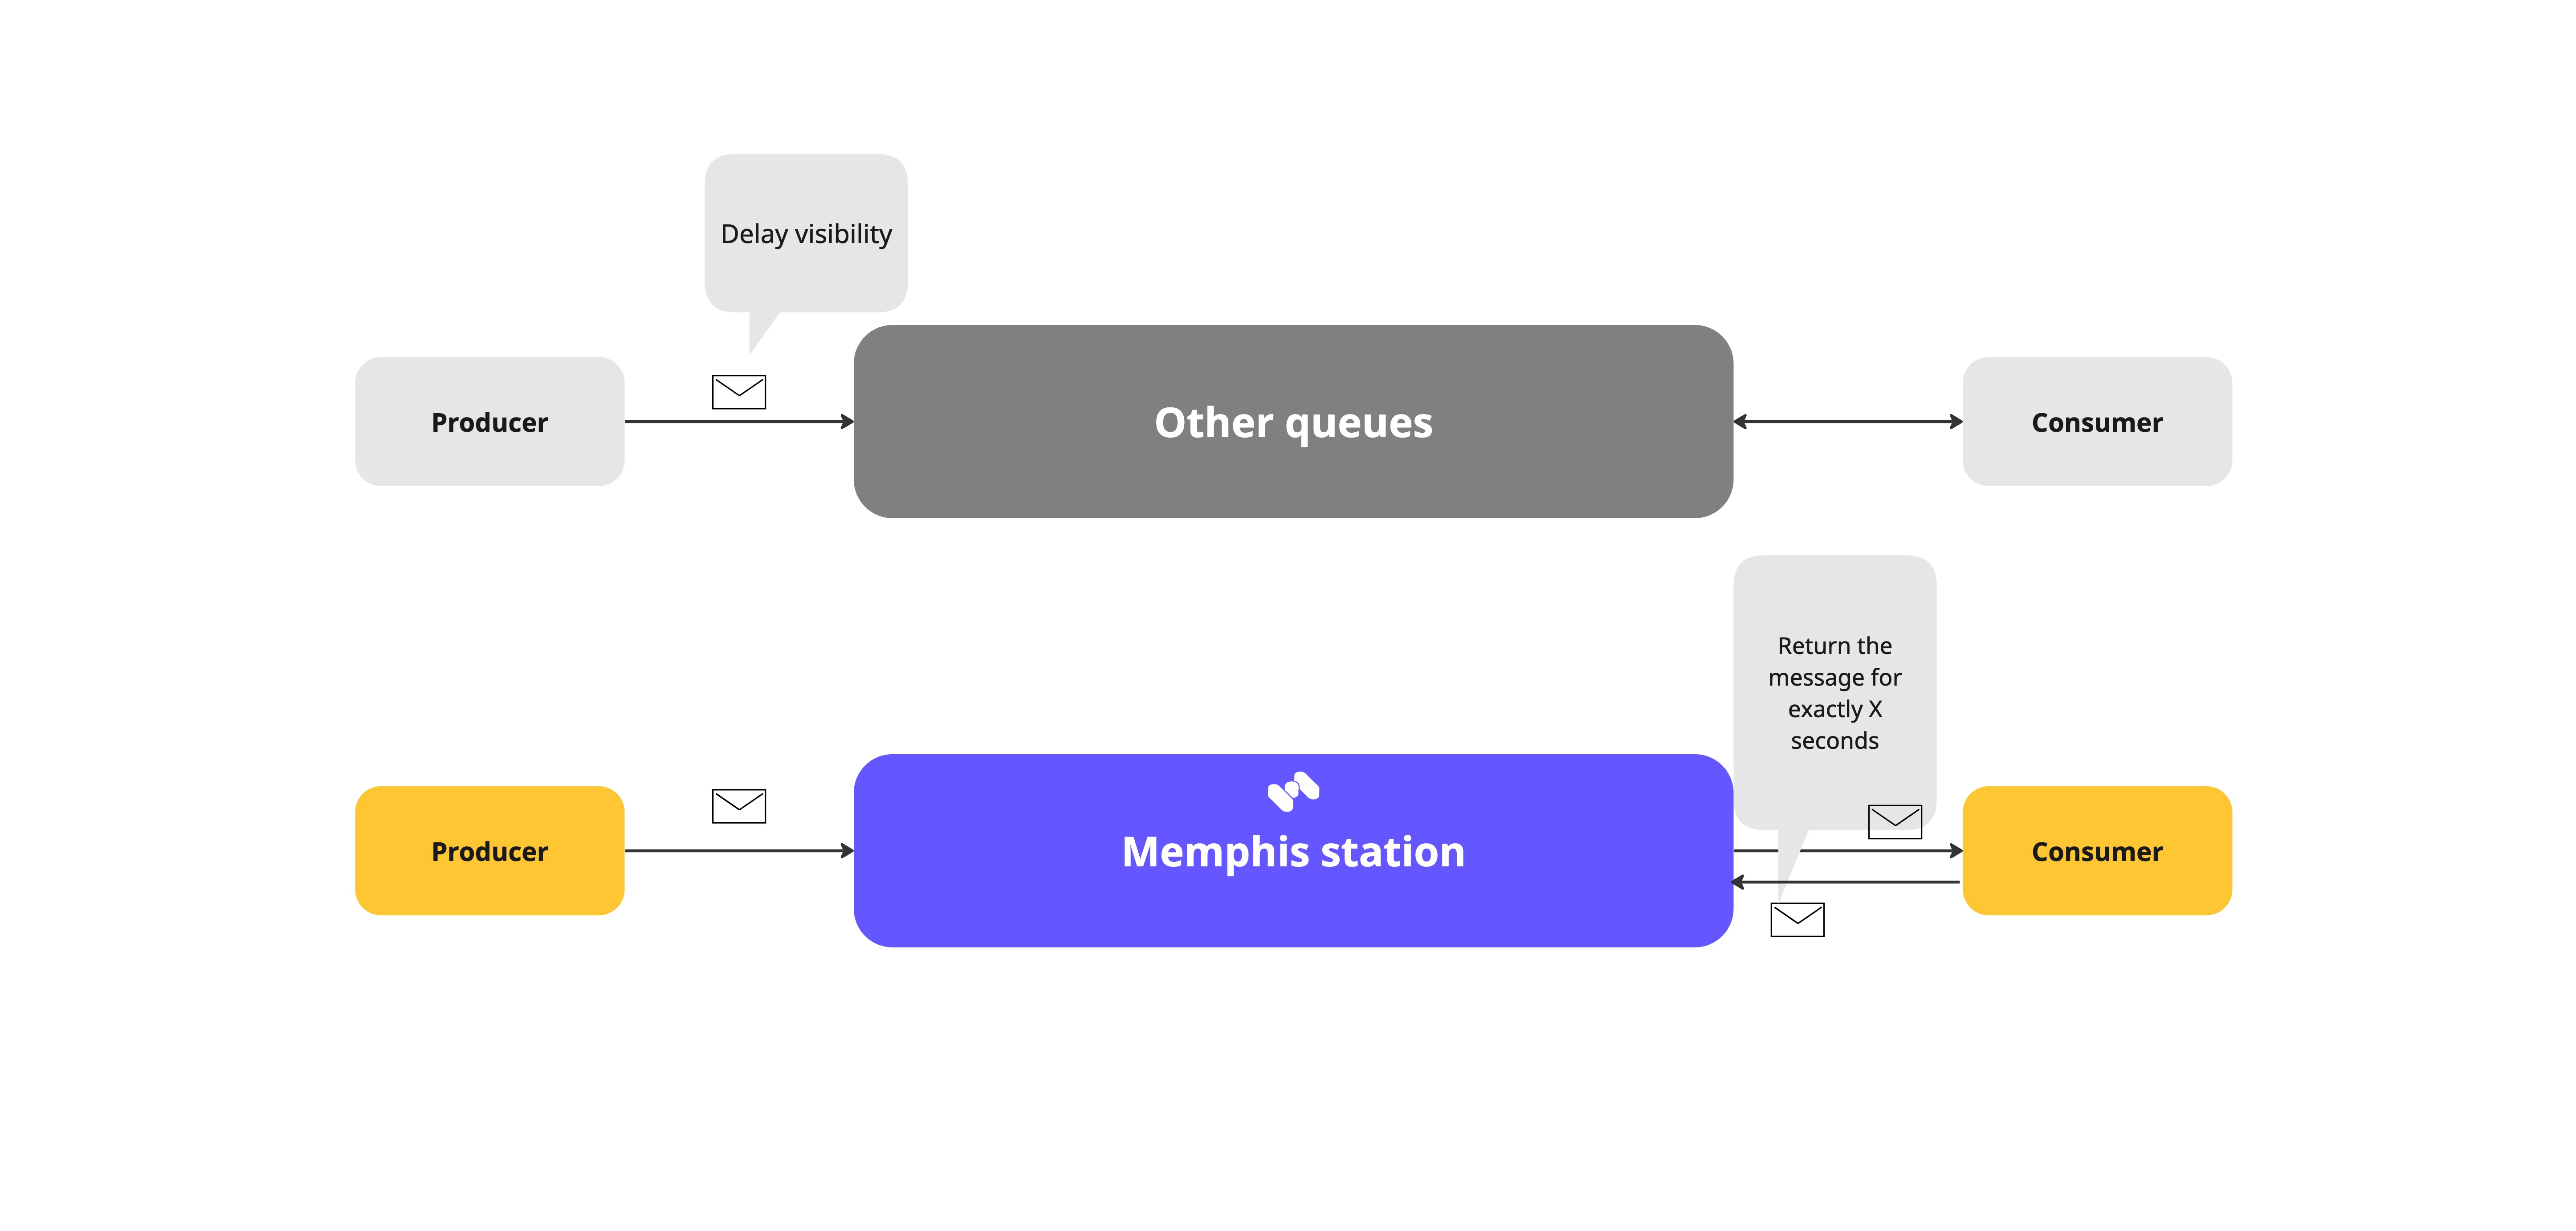 Diagram illustrating message queuing system with producers and consumers, featuring 'Other queues' with delay visibility and 'Memphis station' with exact message return time.
